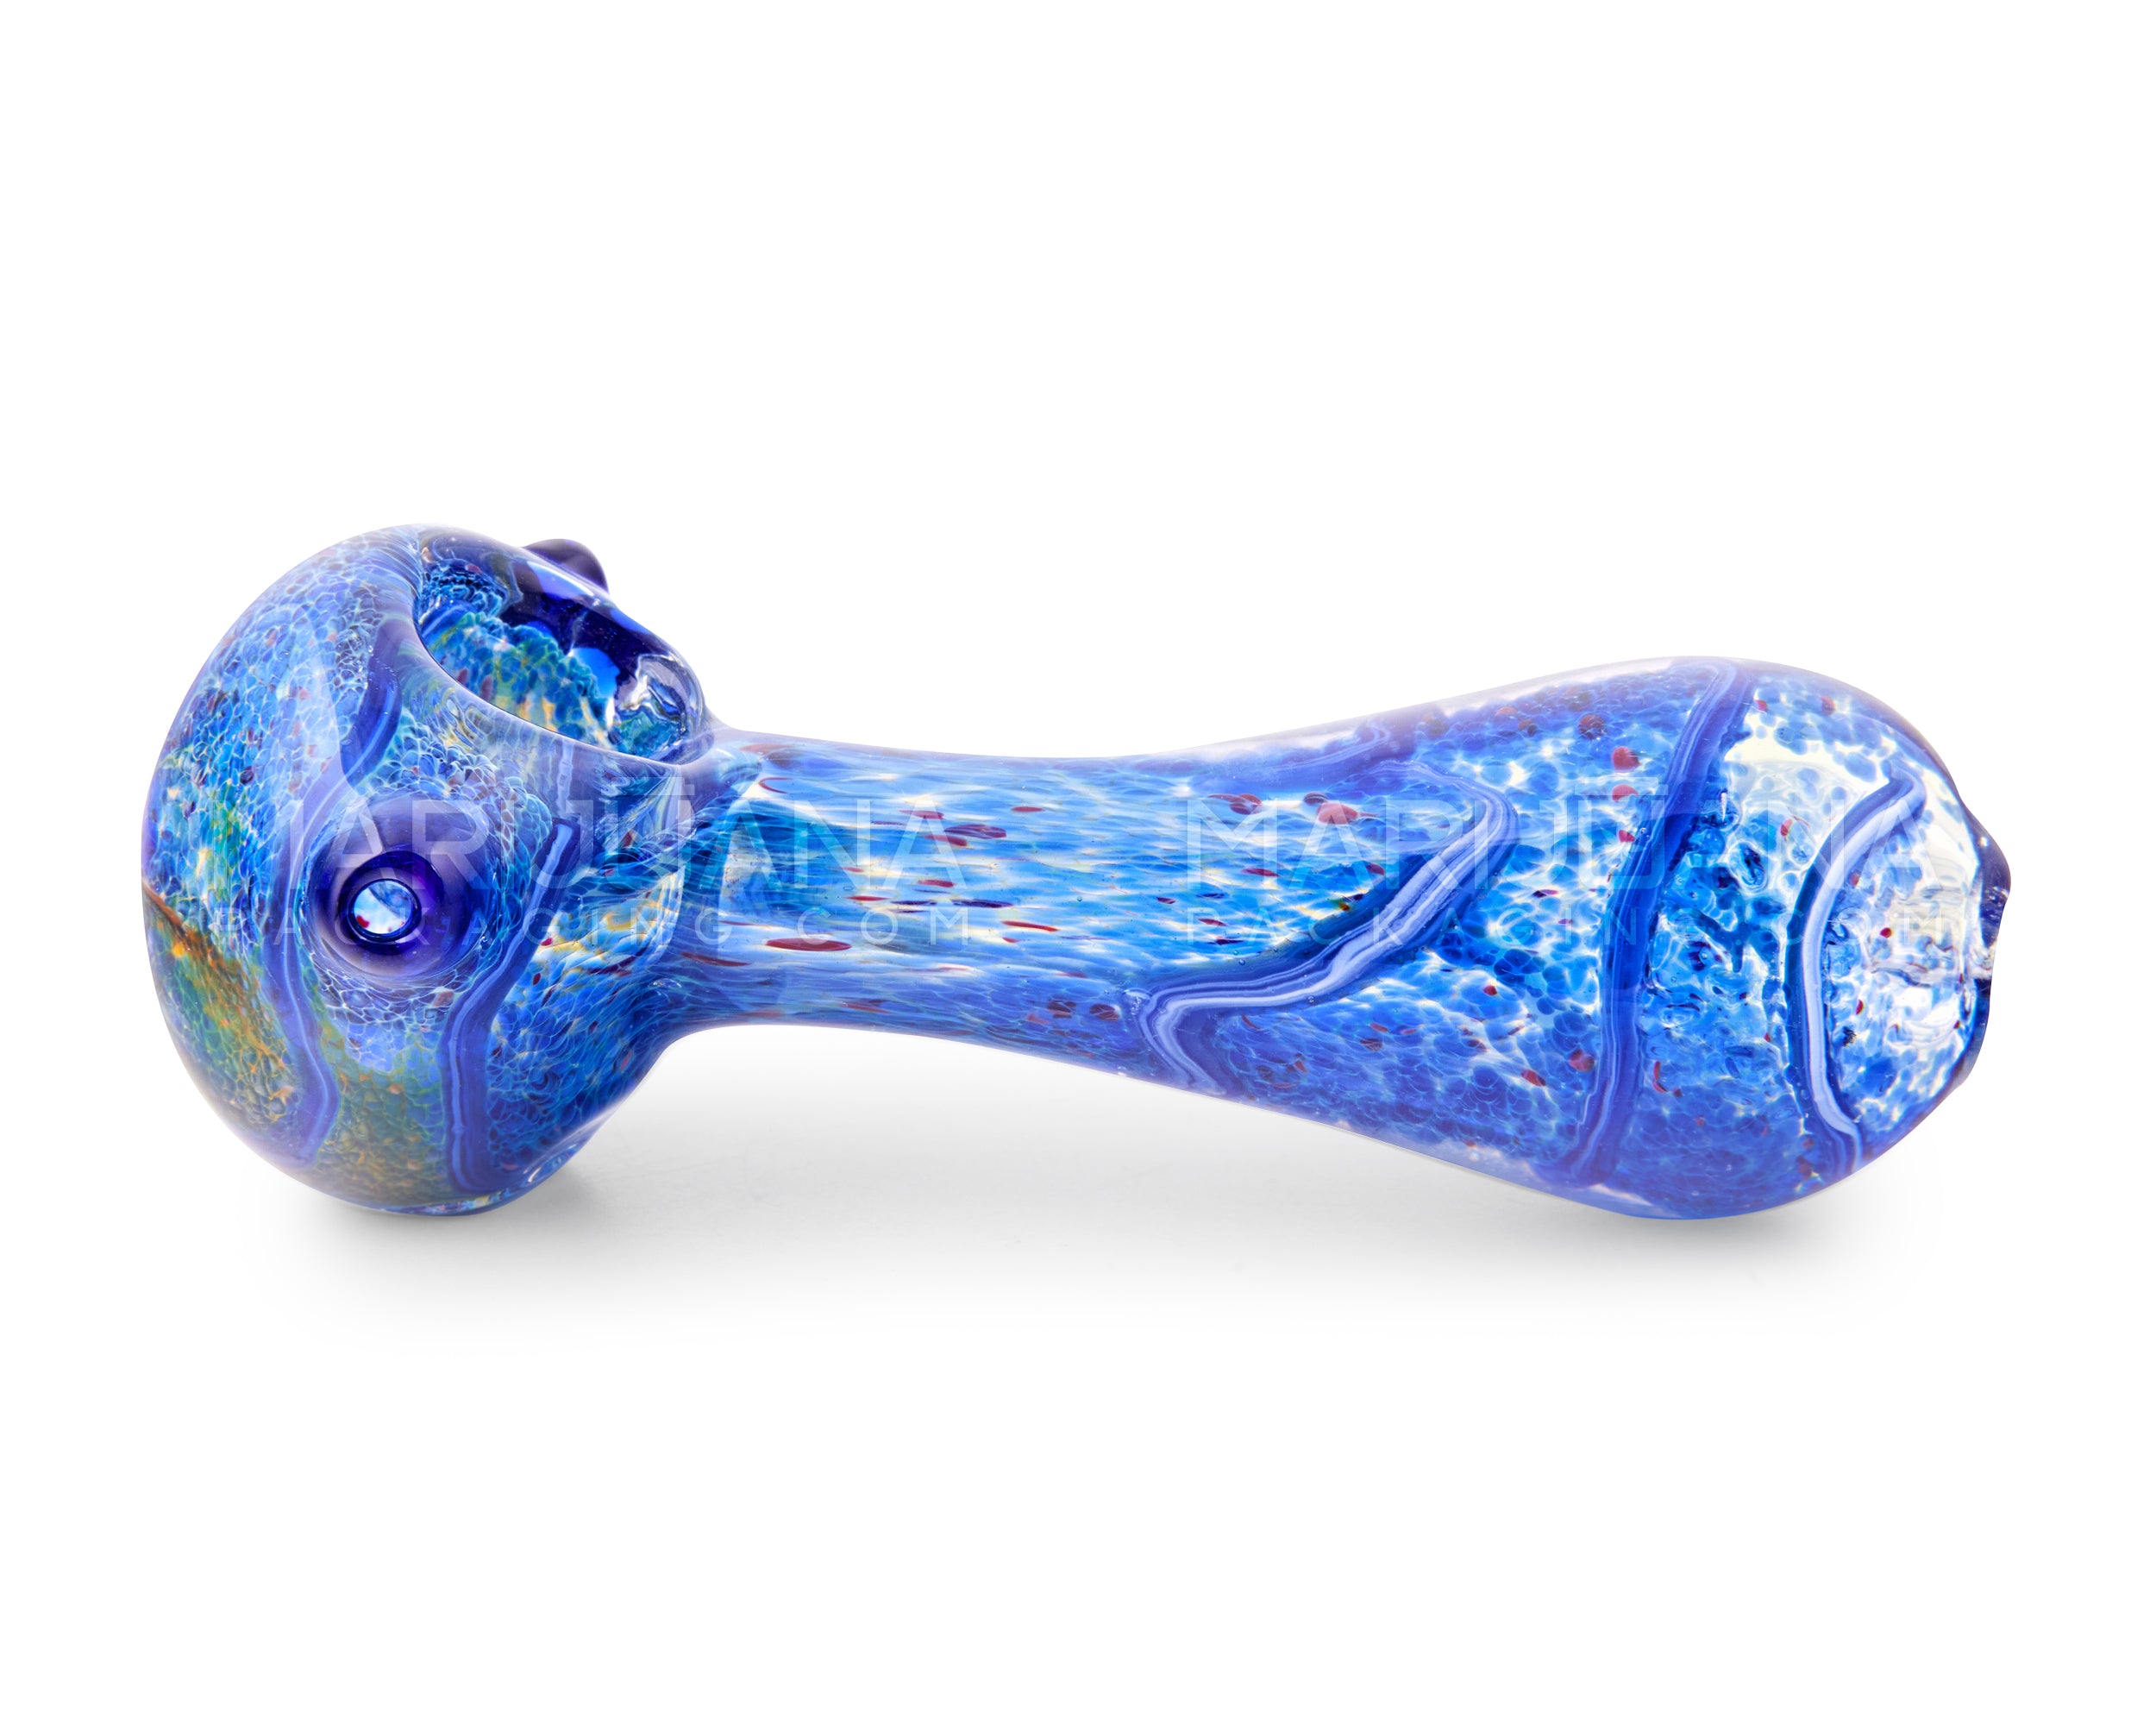 Frit & Fumed Spiral Spoon Hand Pipe w/ Triple Knockers | 4.5in Long - Glass - Assorted - 4